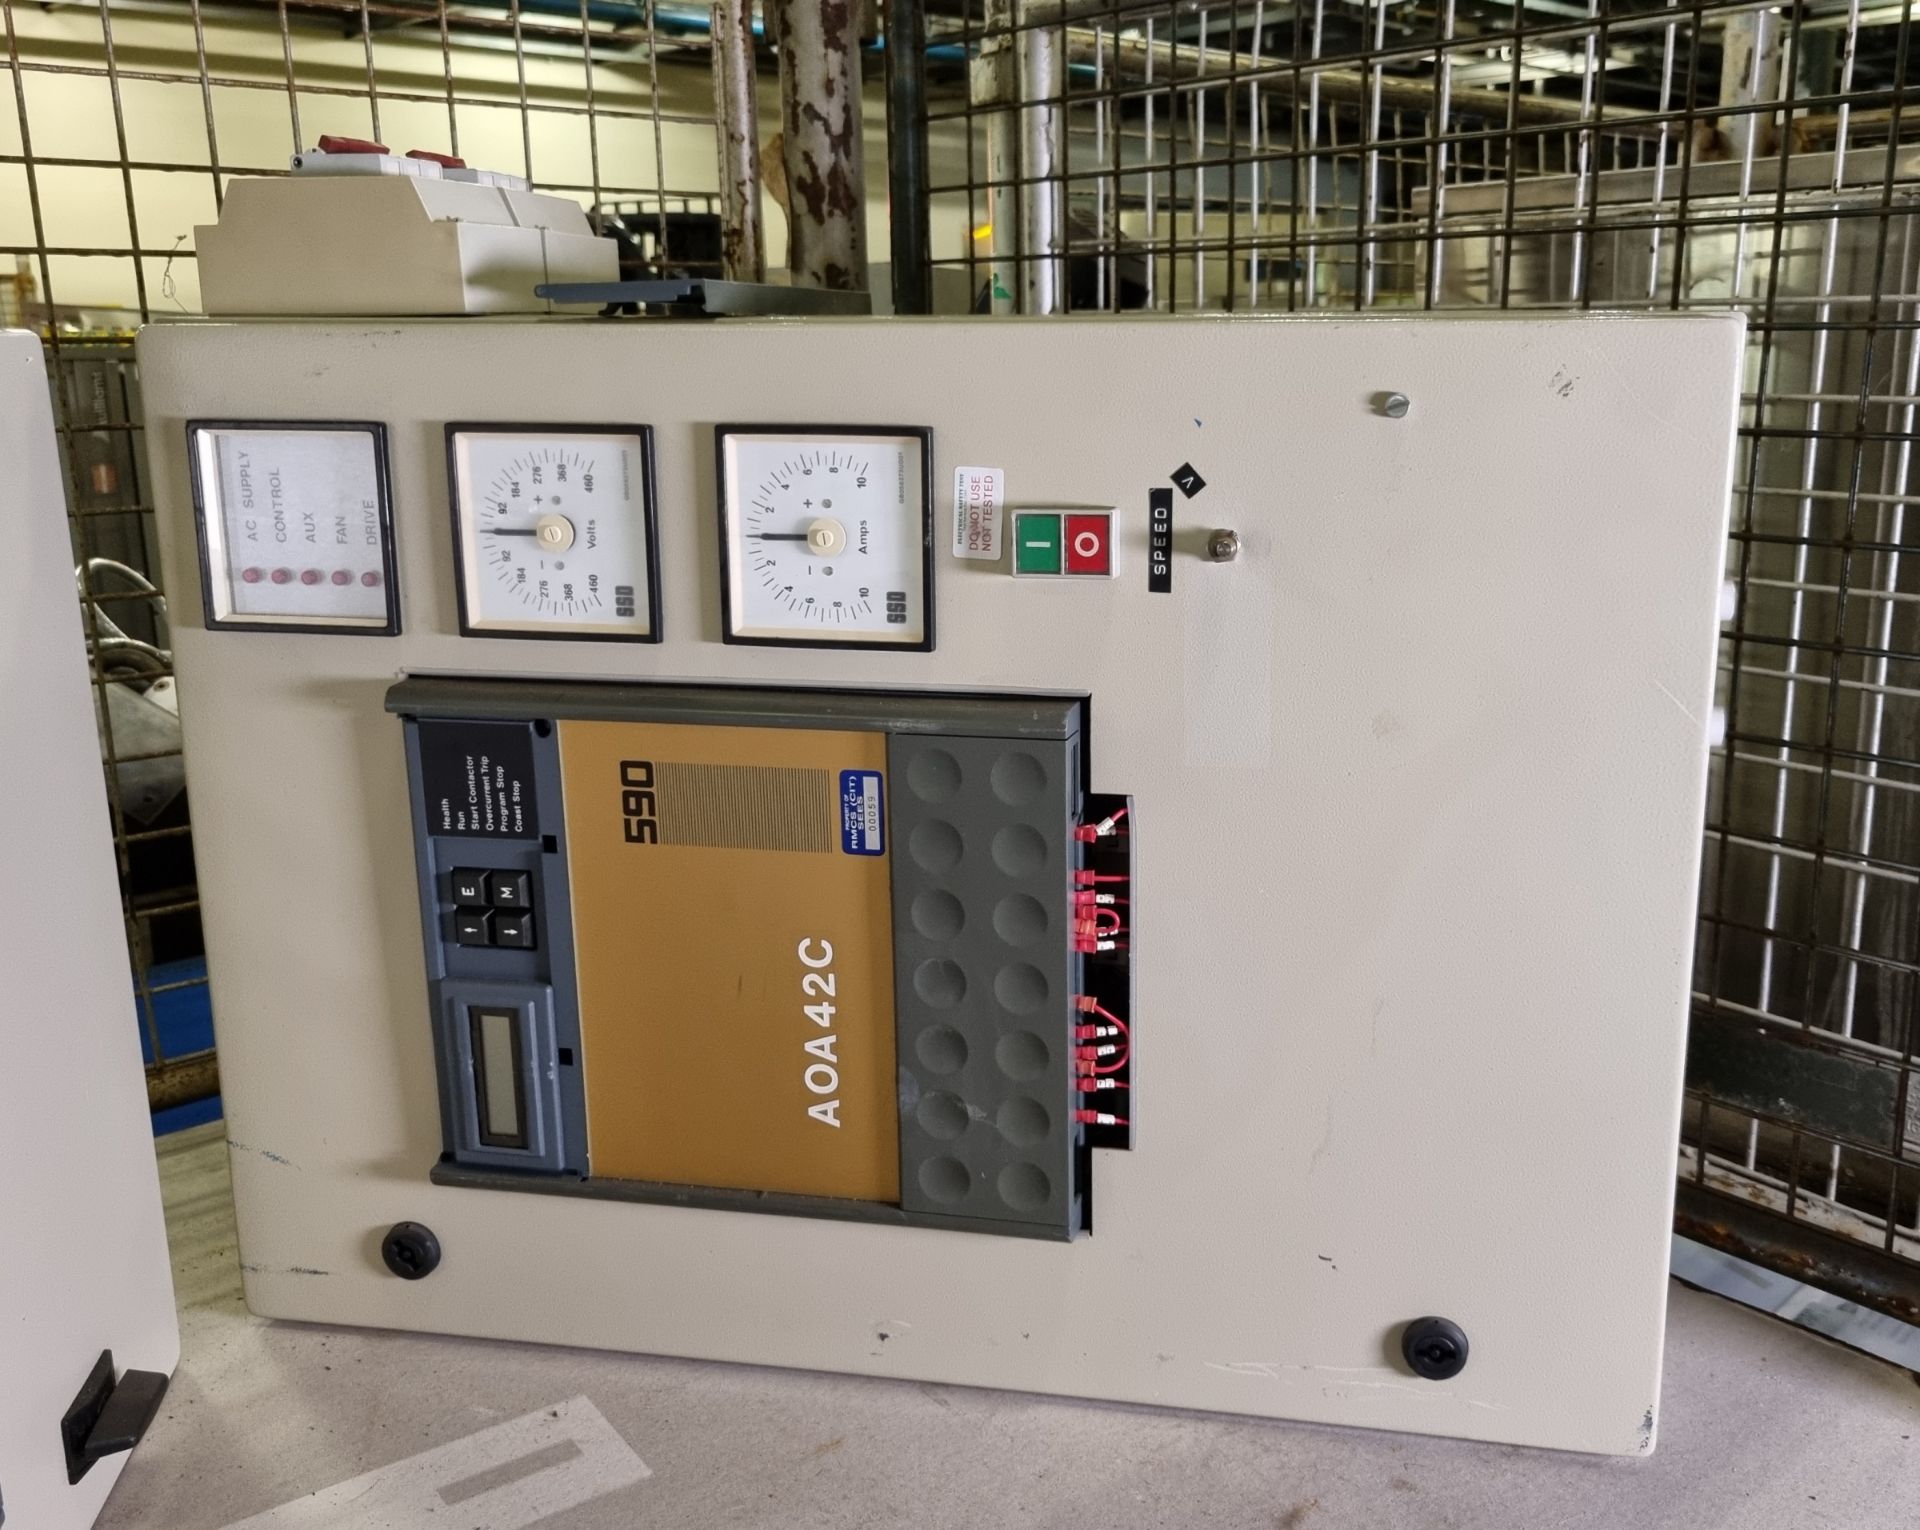 2x 590 Series voltage control panels - 500V 32A - L57xW70xH22cm - Image 2 of 8